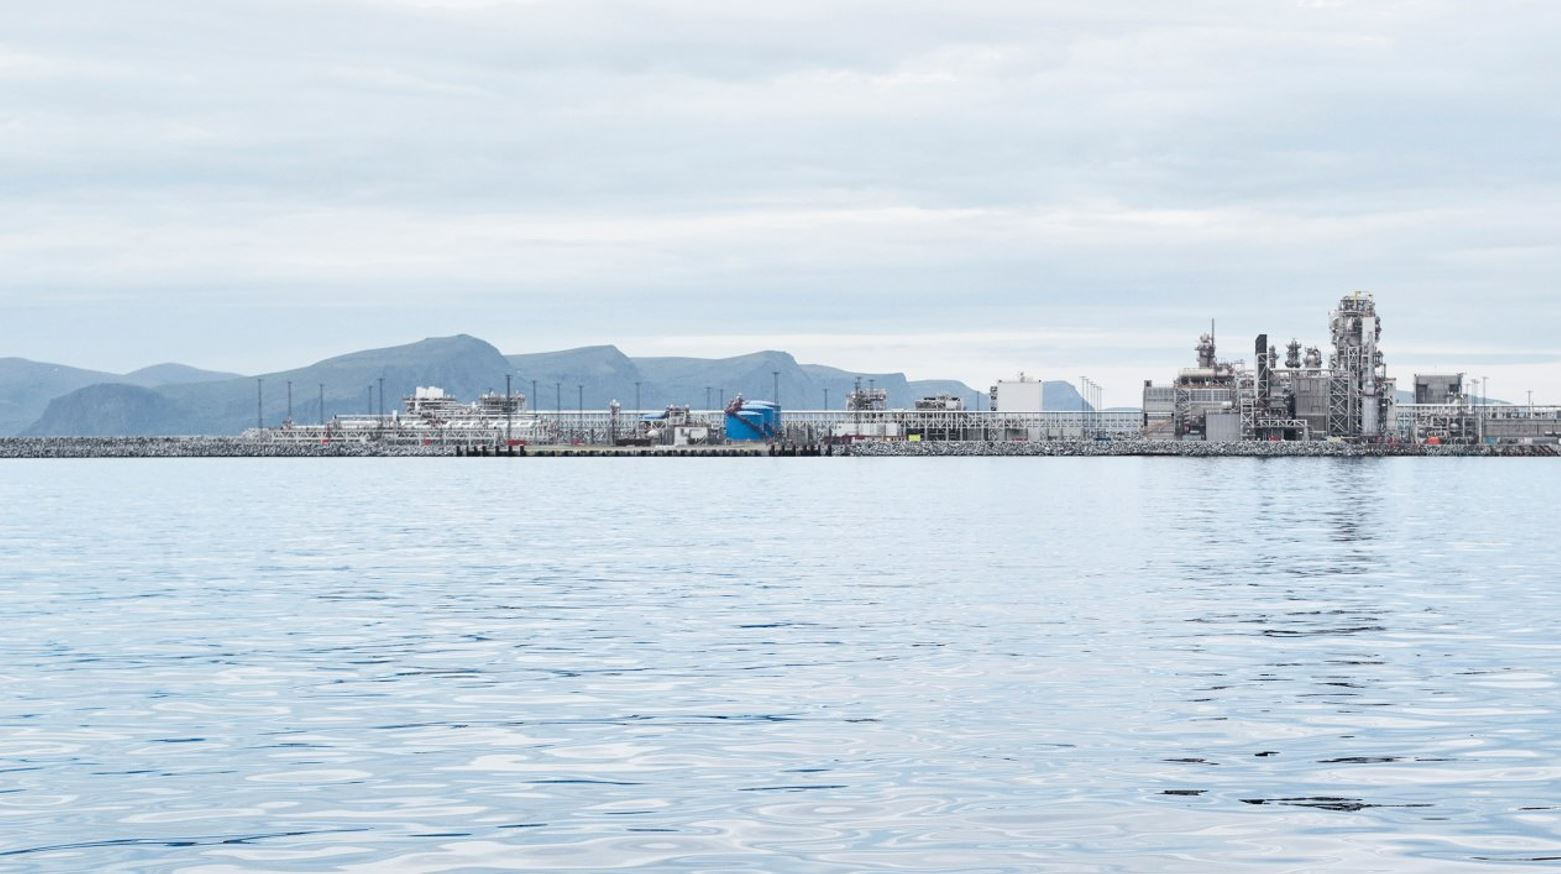 Equinor's Hammerfest LNG plant on track to restart in May, CEO says